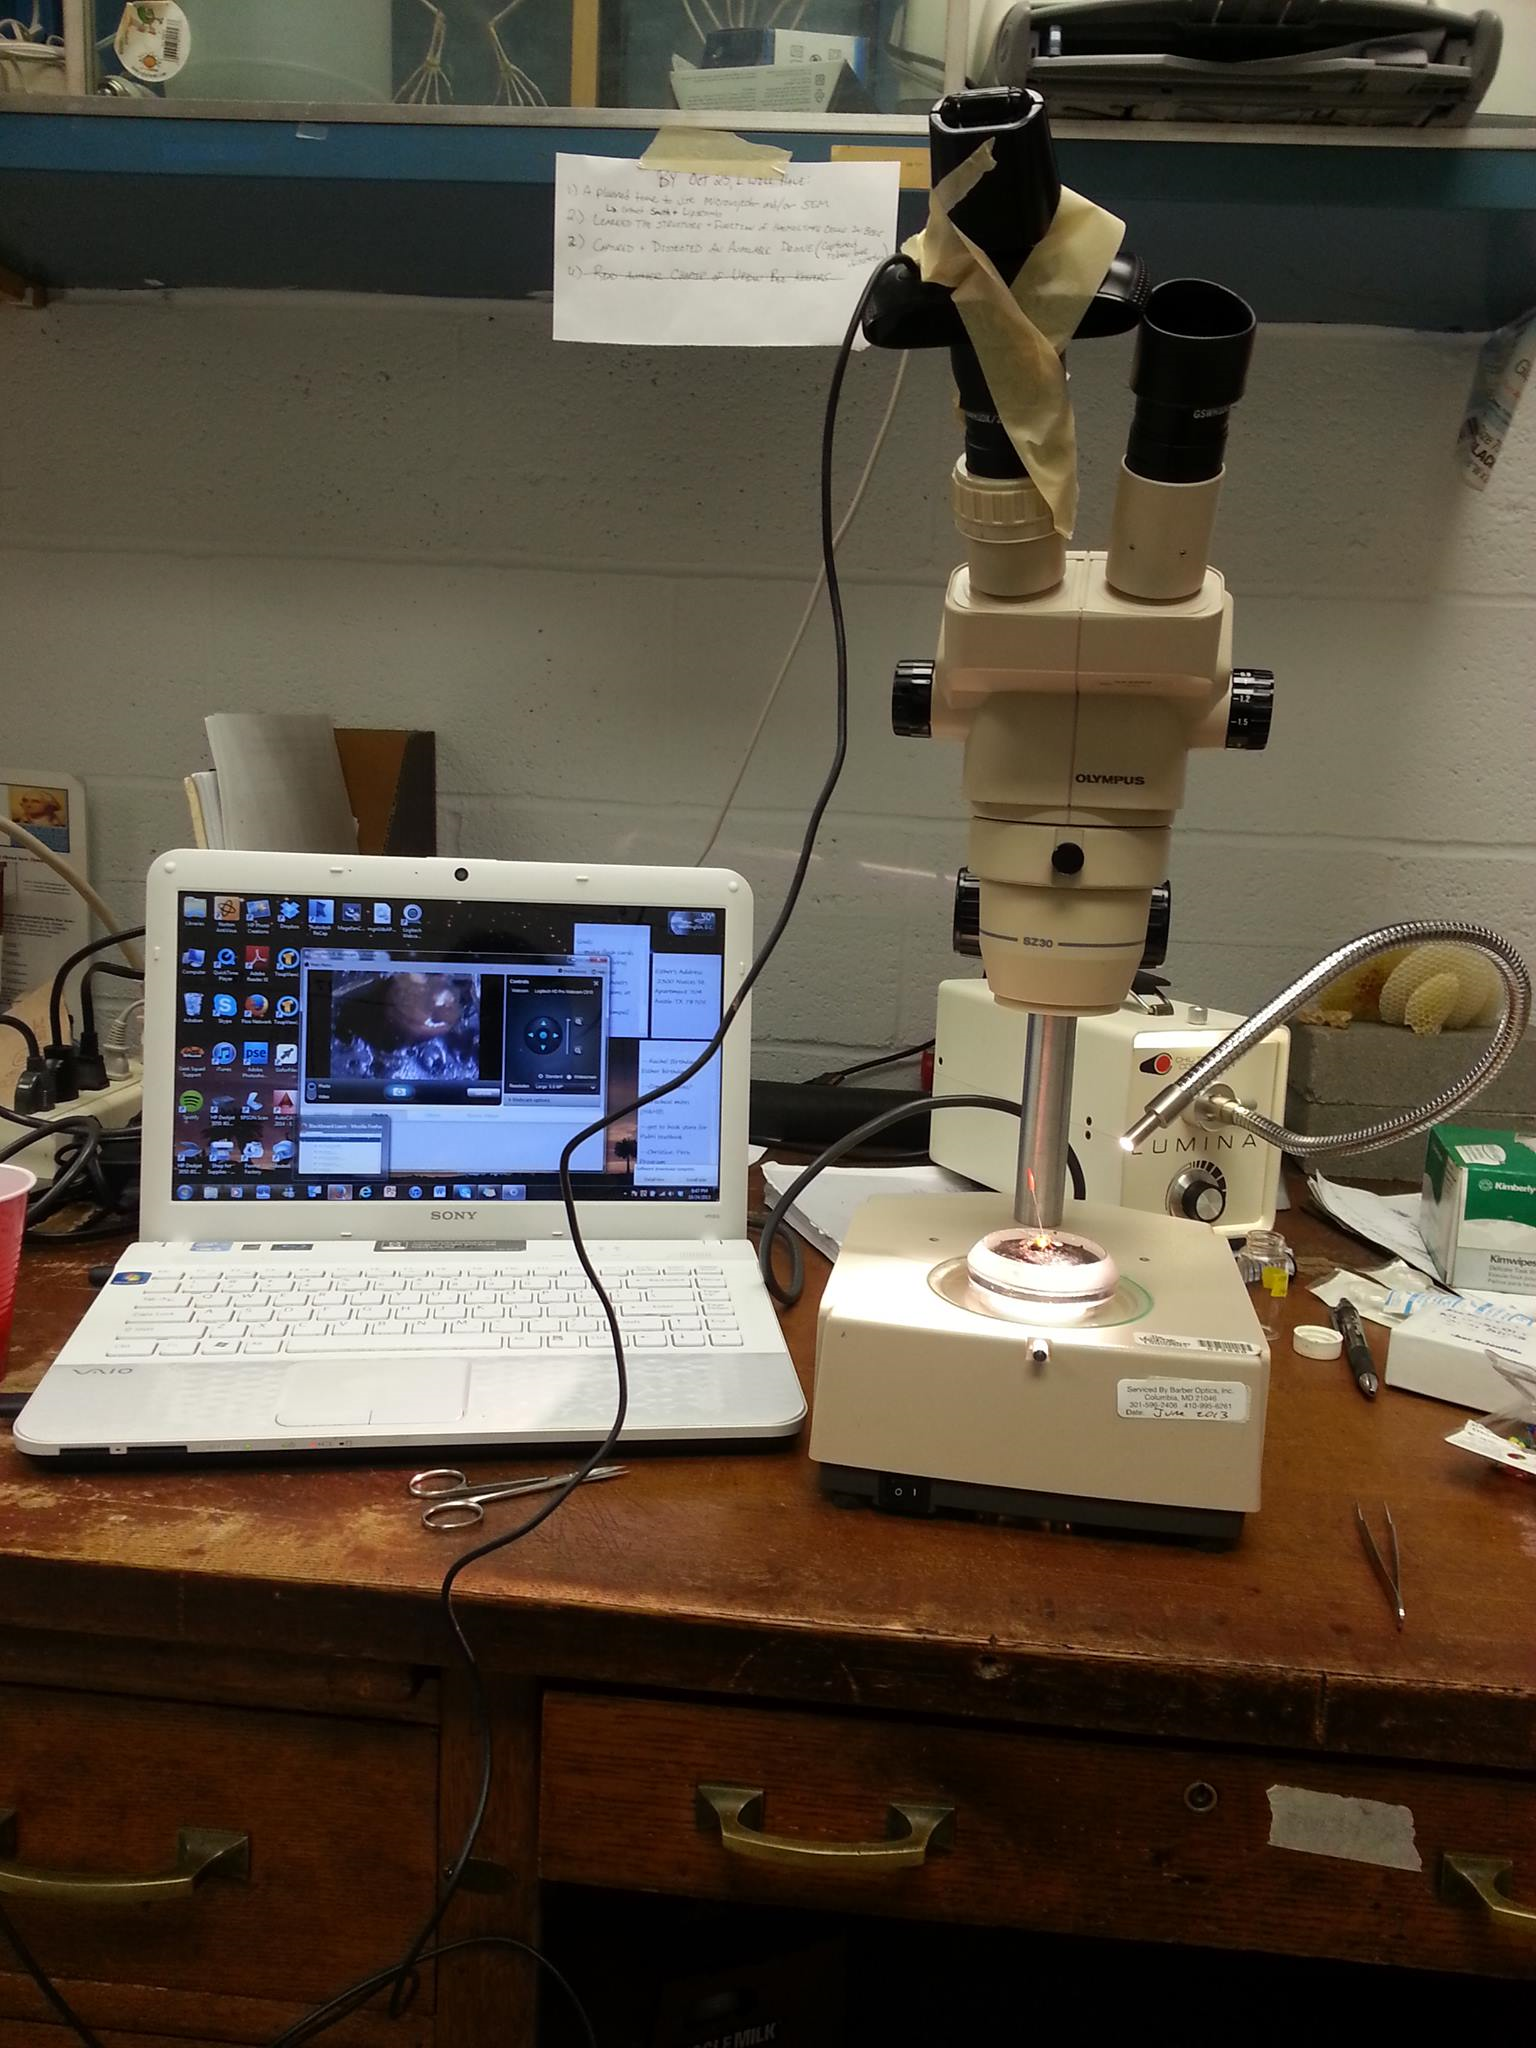 An image of a light microscope with a web cam taped to the occular lense; beside it is a laptop showing a video of under the scope